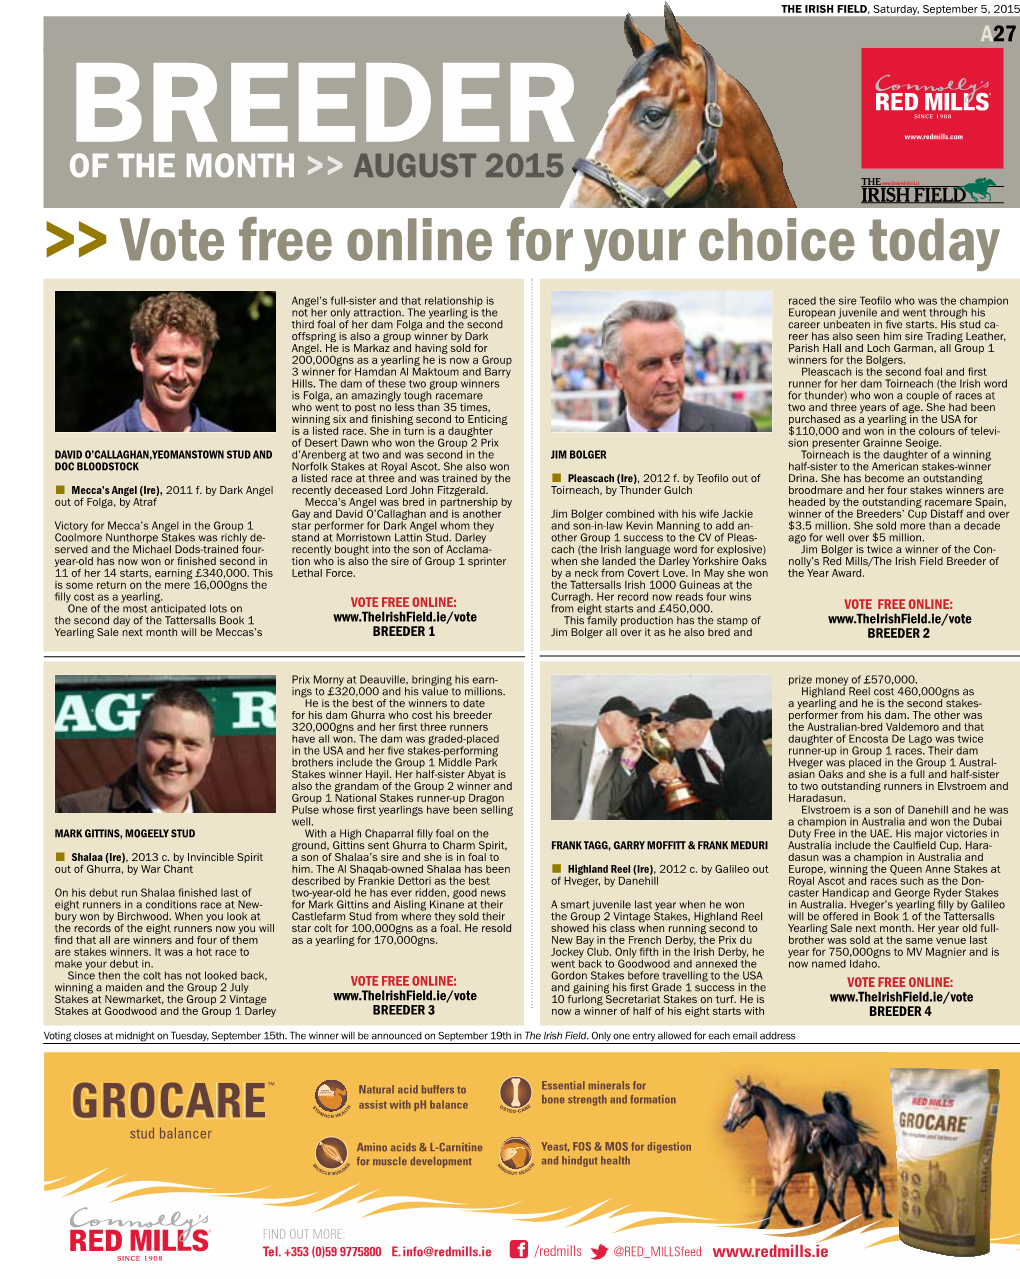 Vote Free Online for Your Choice Today